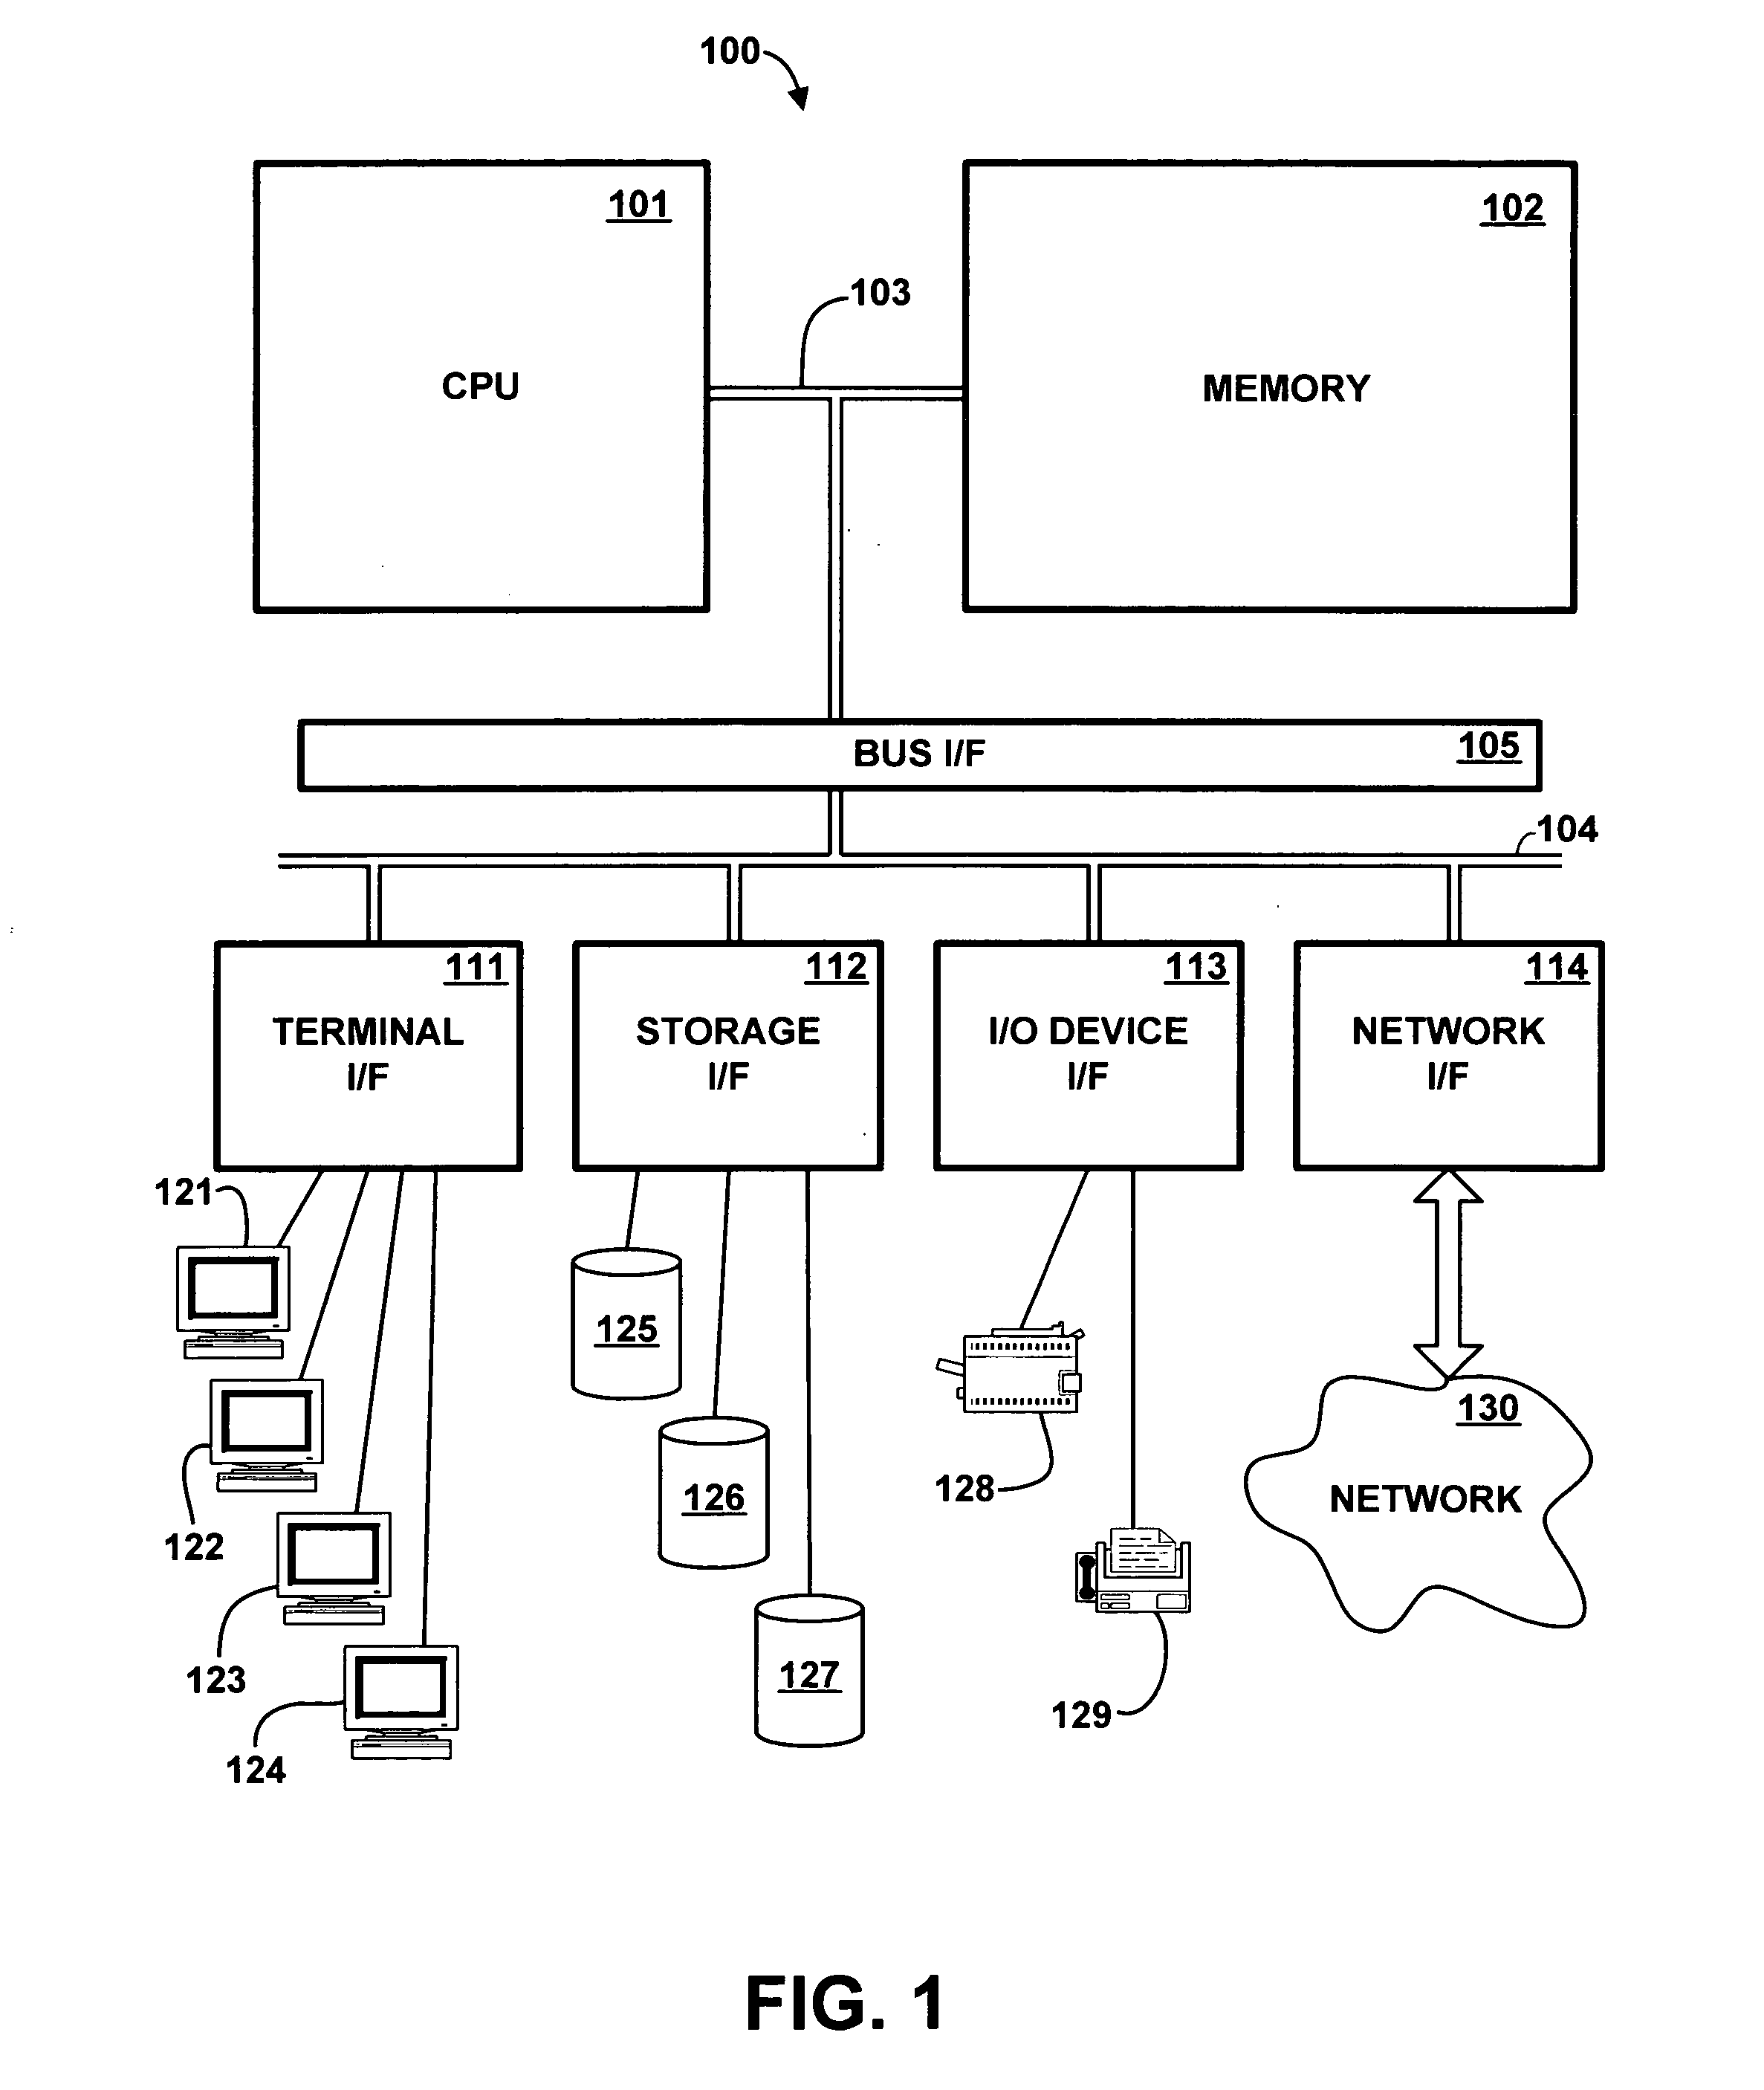 Method and apparatus for optimizing execution of database queries containing user-defined functions